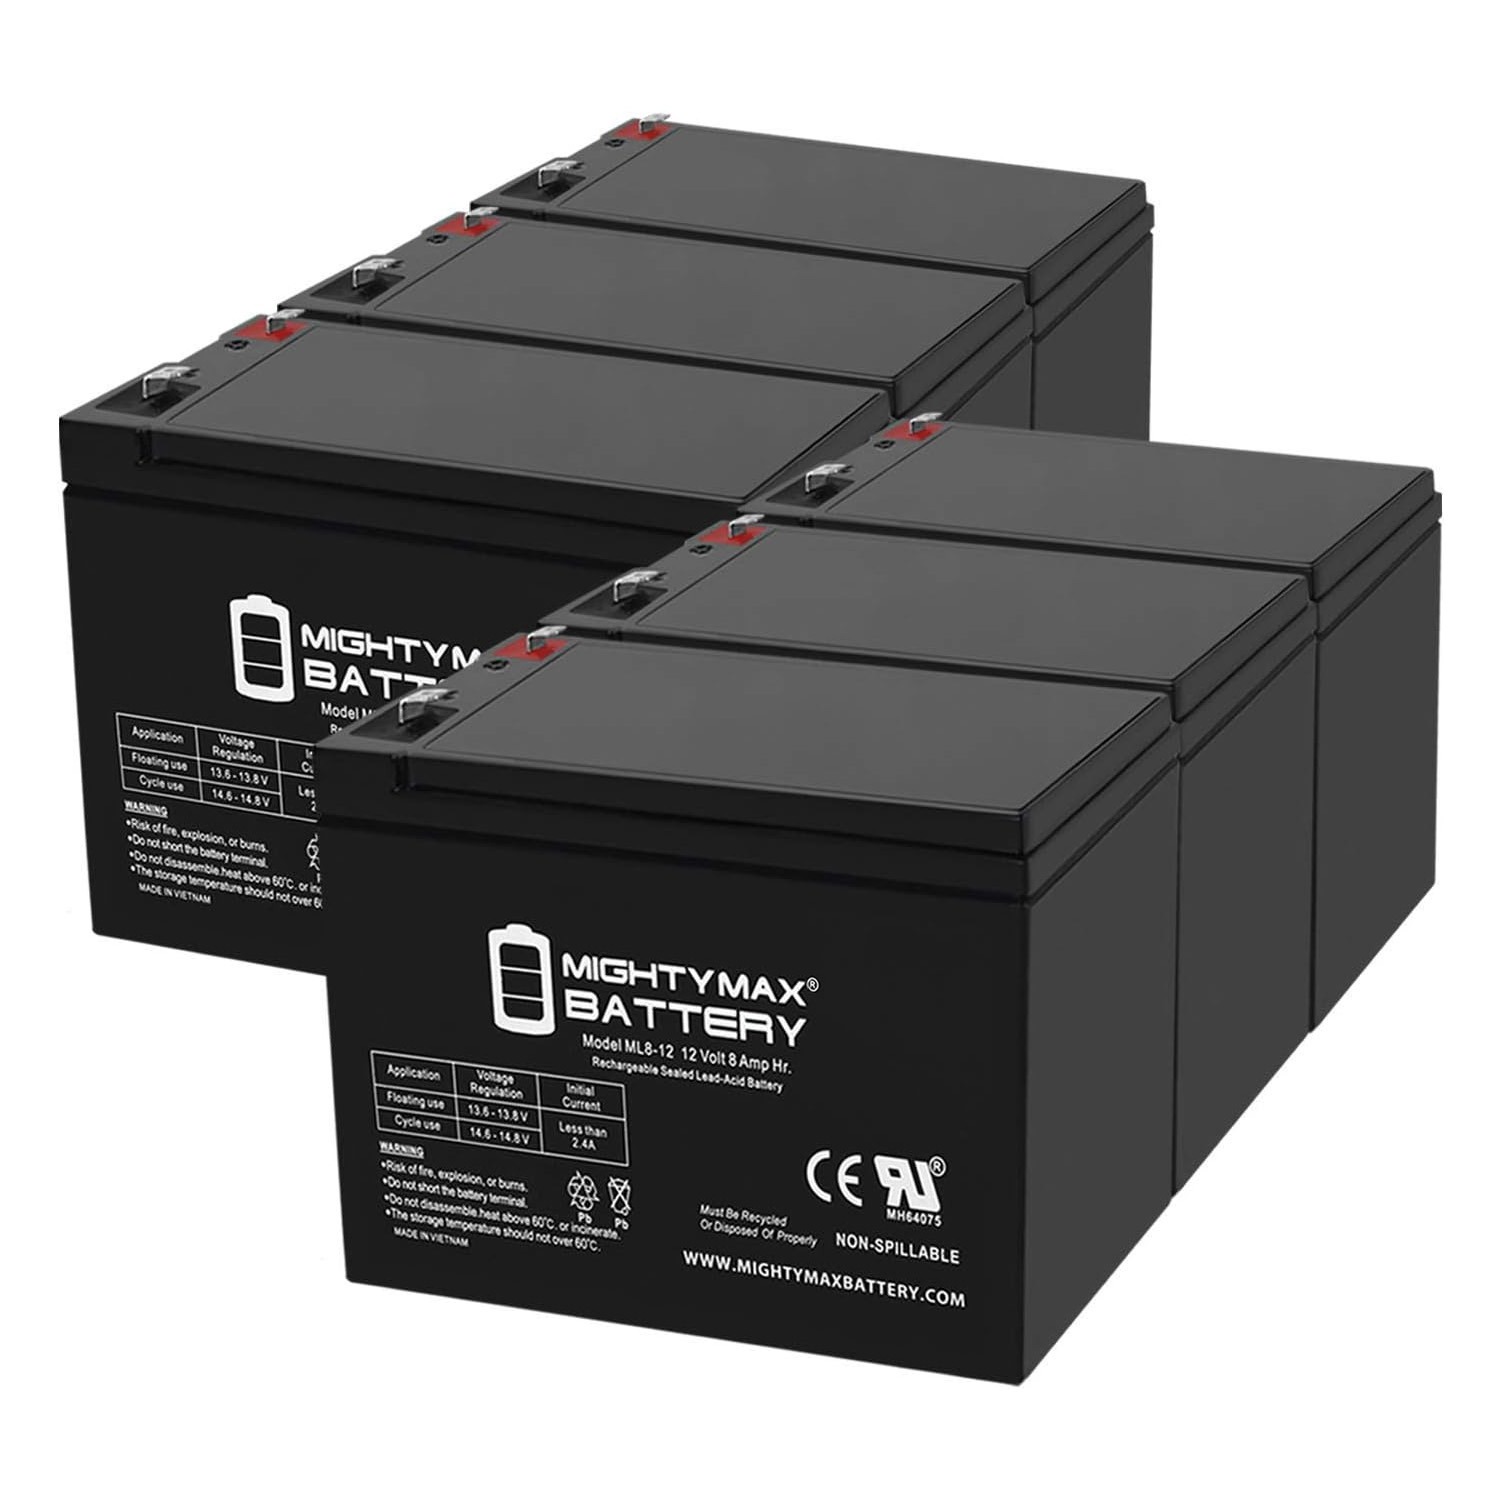 12V 8Ah SLA Replacement Battery for Exkate Powerboards X-24 - 6 Pack